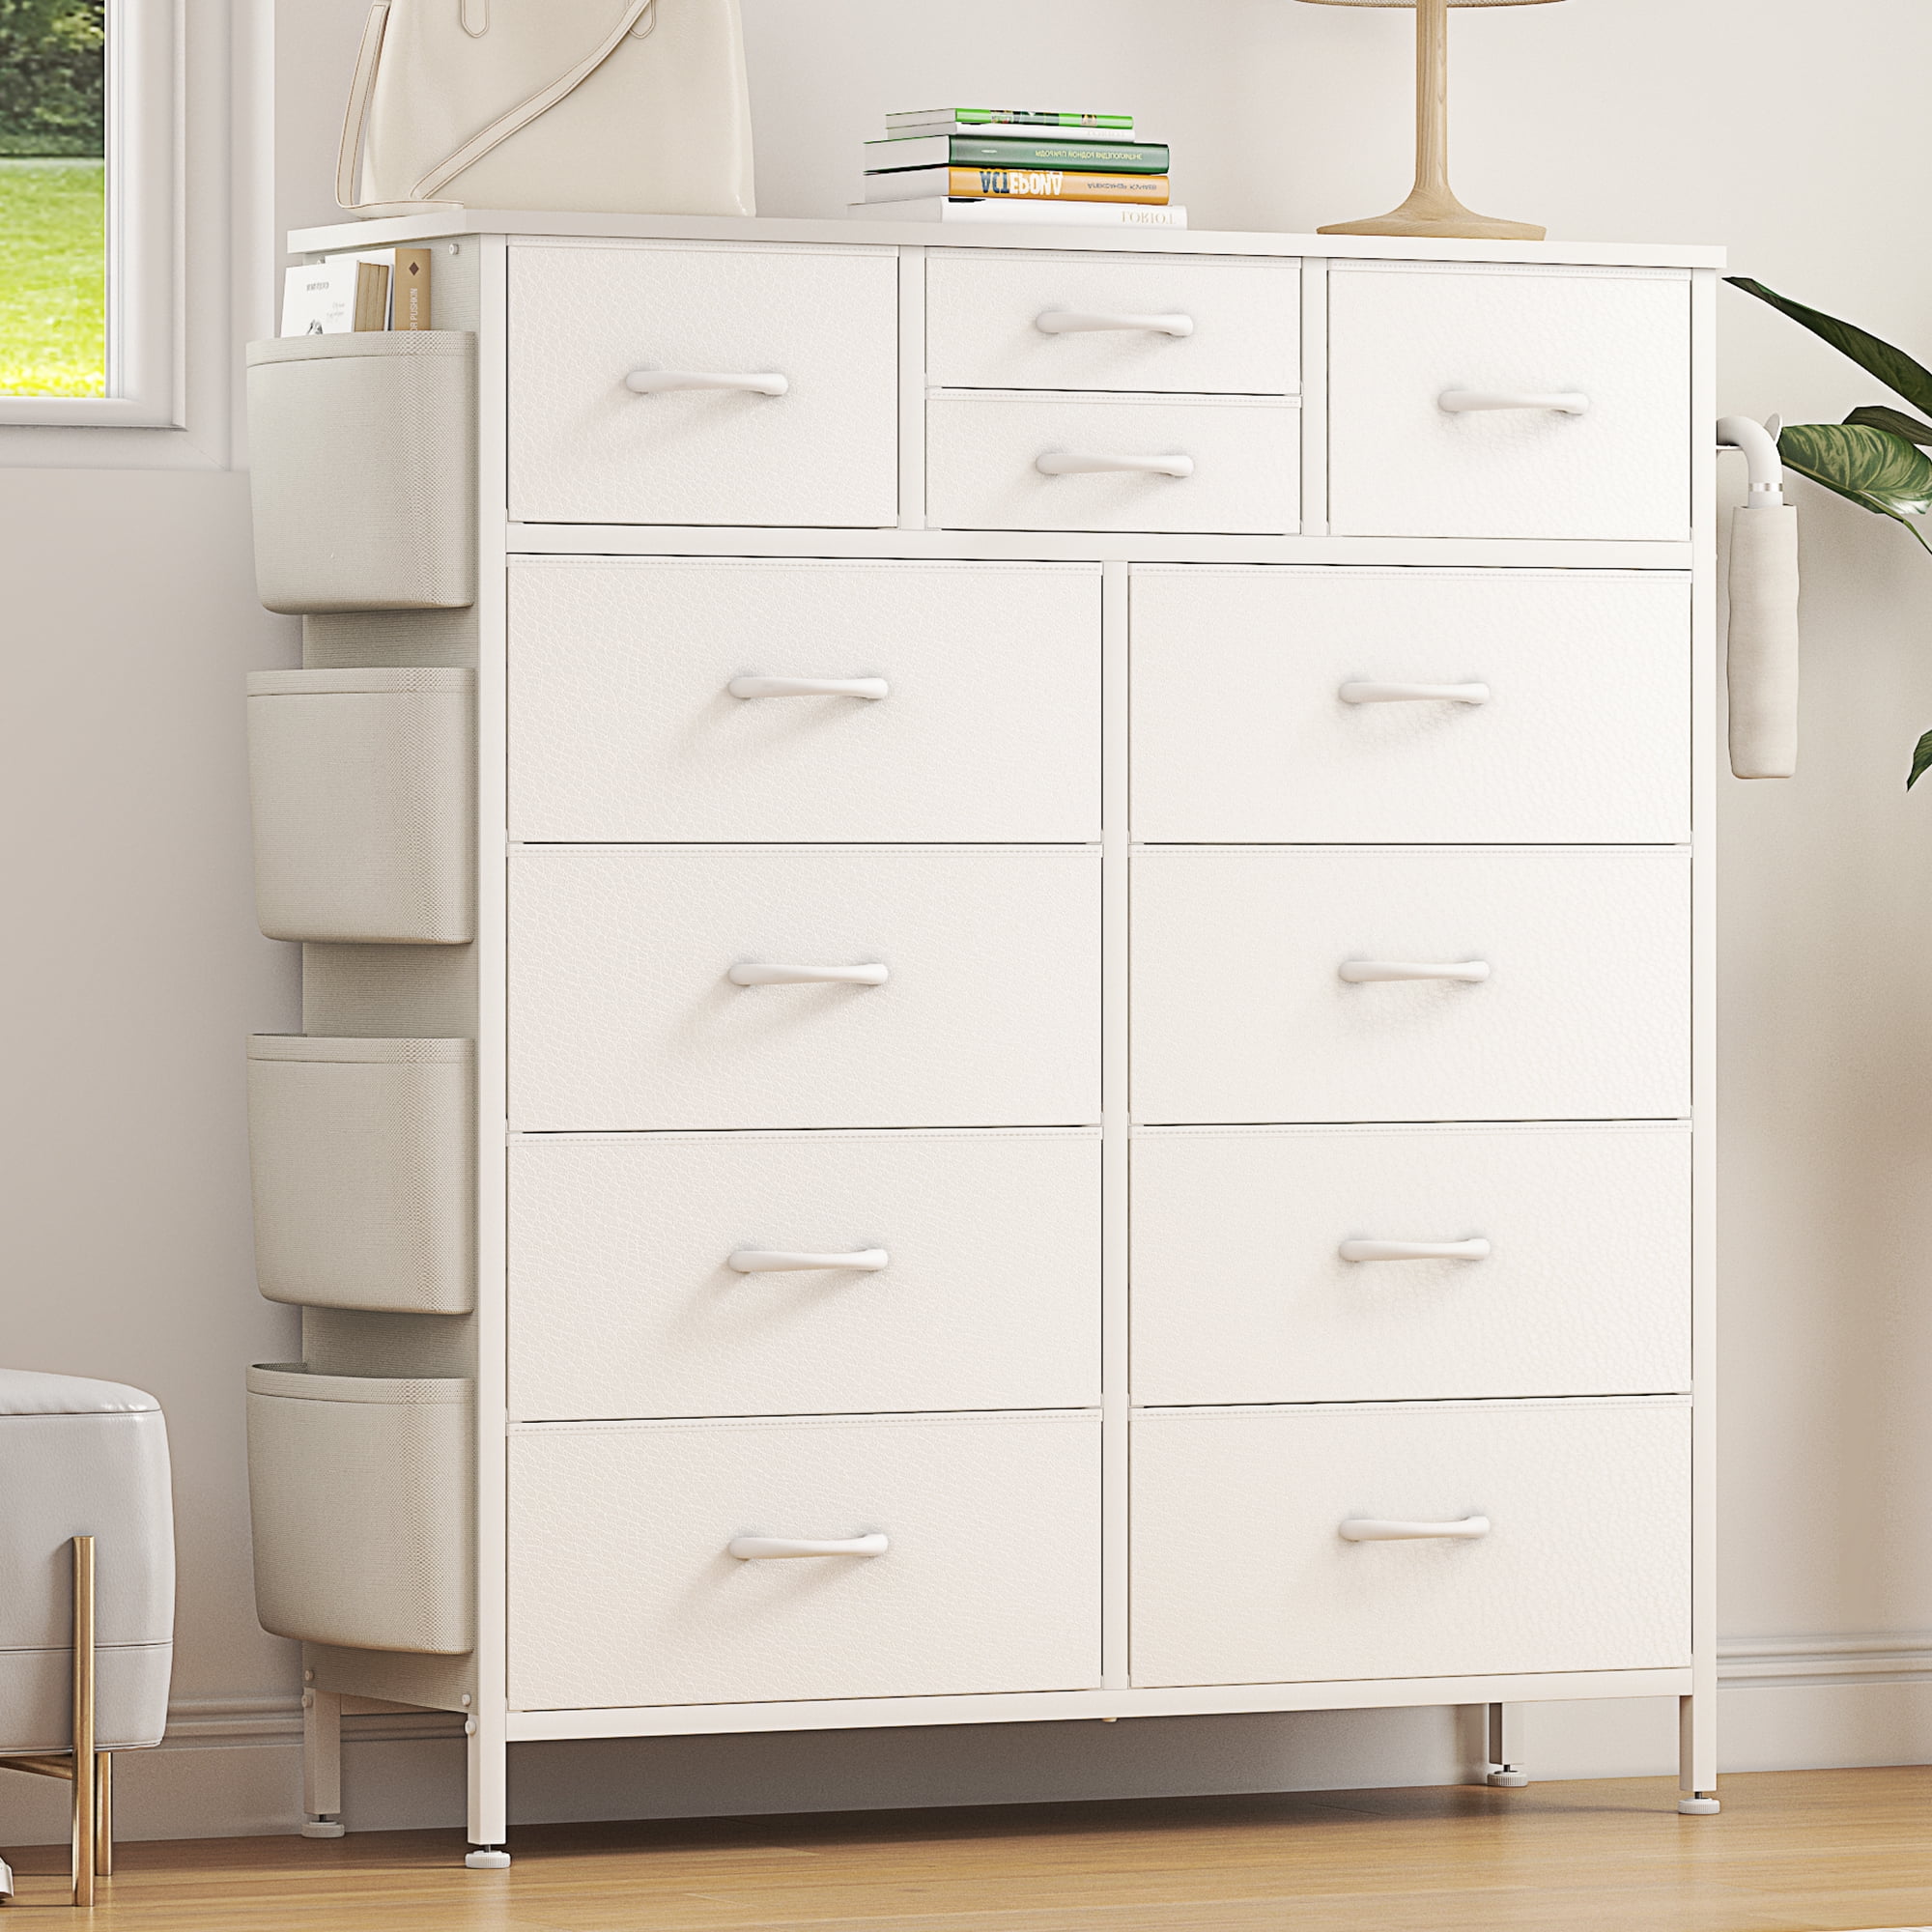 GIKPAL Dressers for Bedroom, White Dresser with 12 Drawers Chest of ...